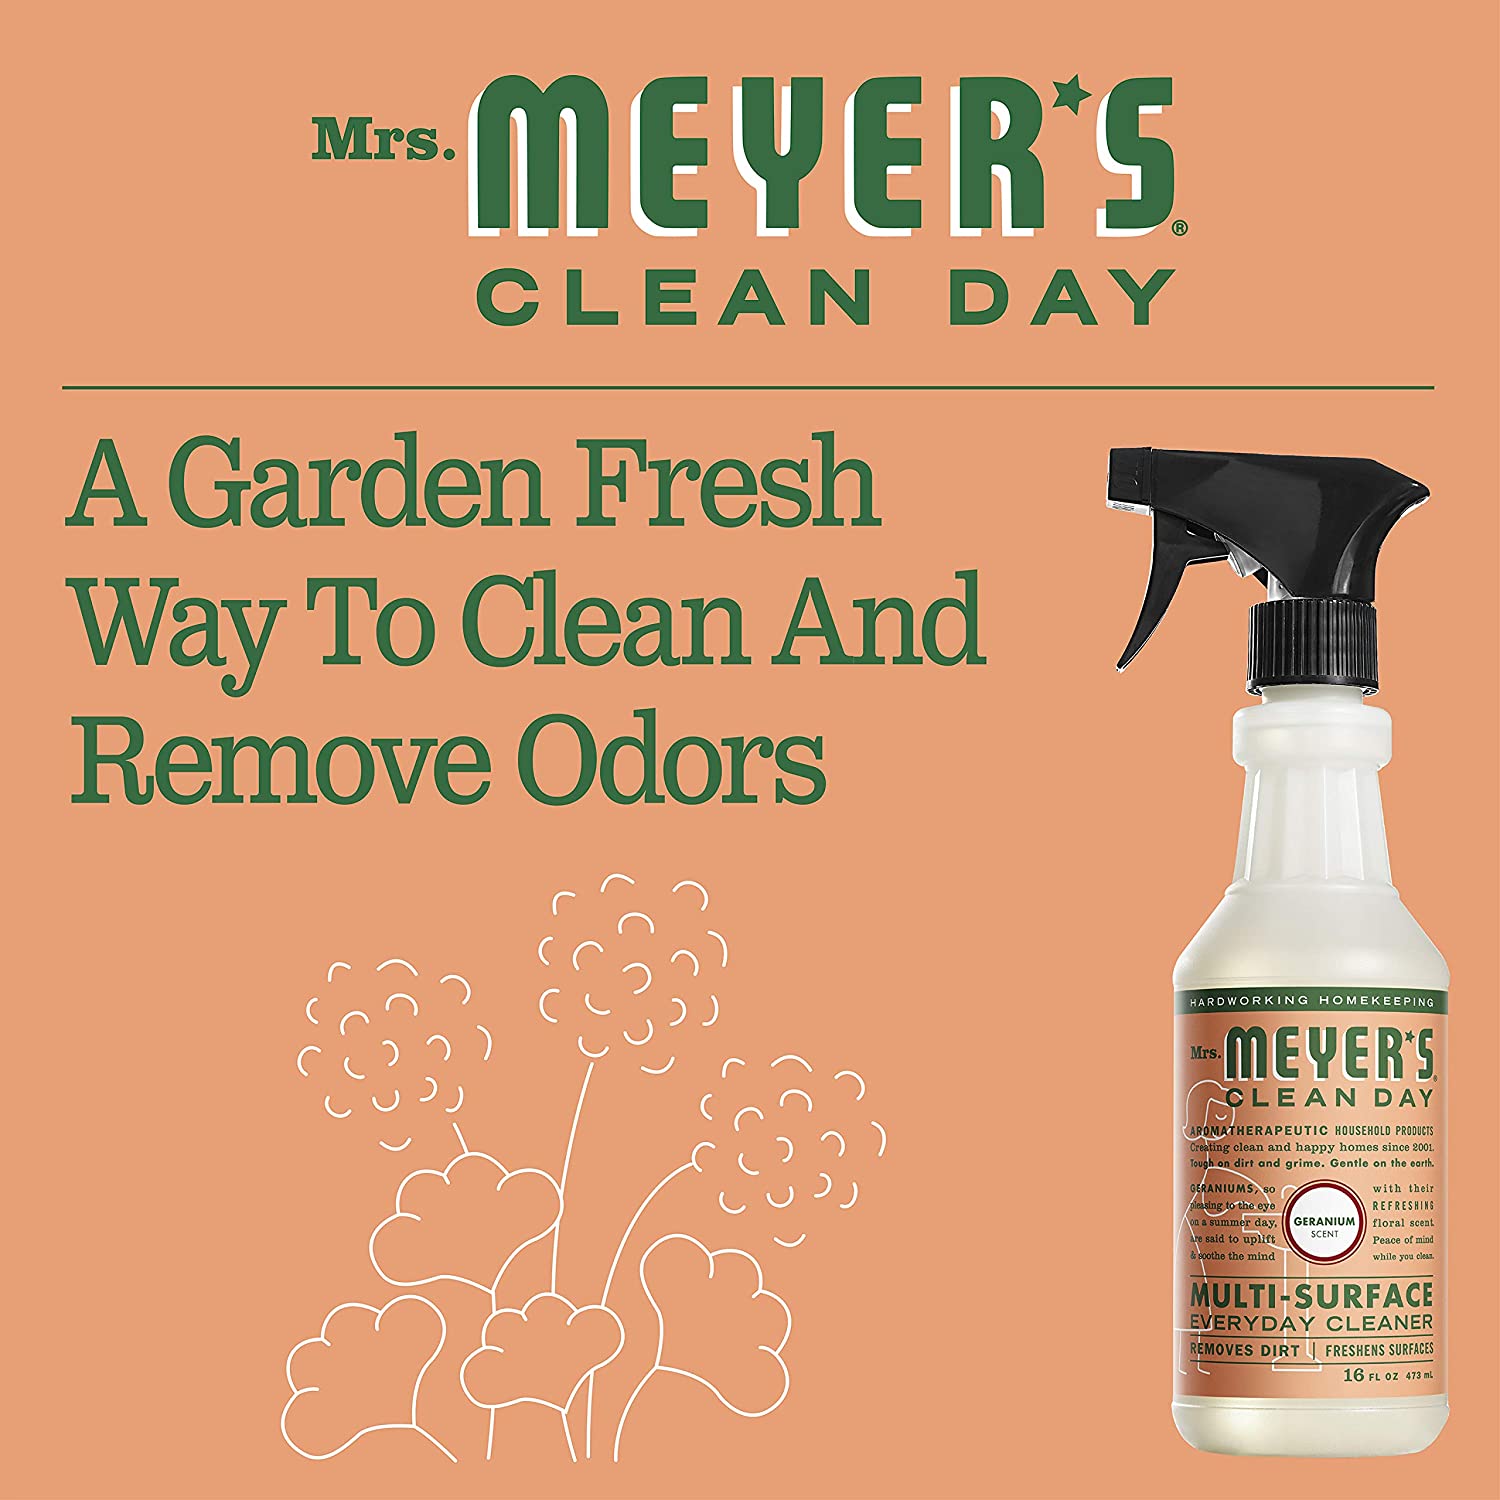 MRS. MEYER'S CLEAN DAY Multi-Surface Cleaner in Geranium